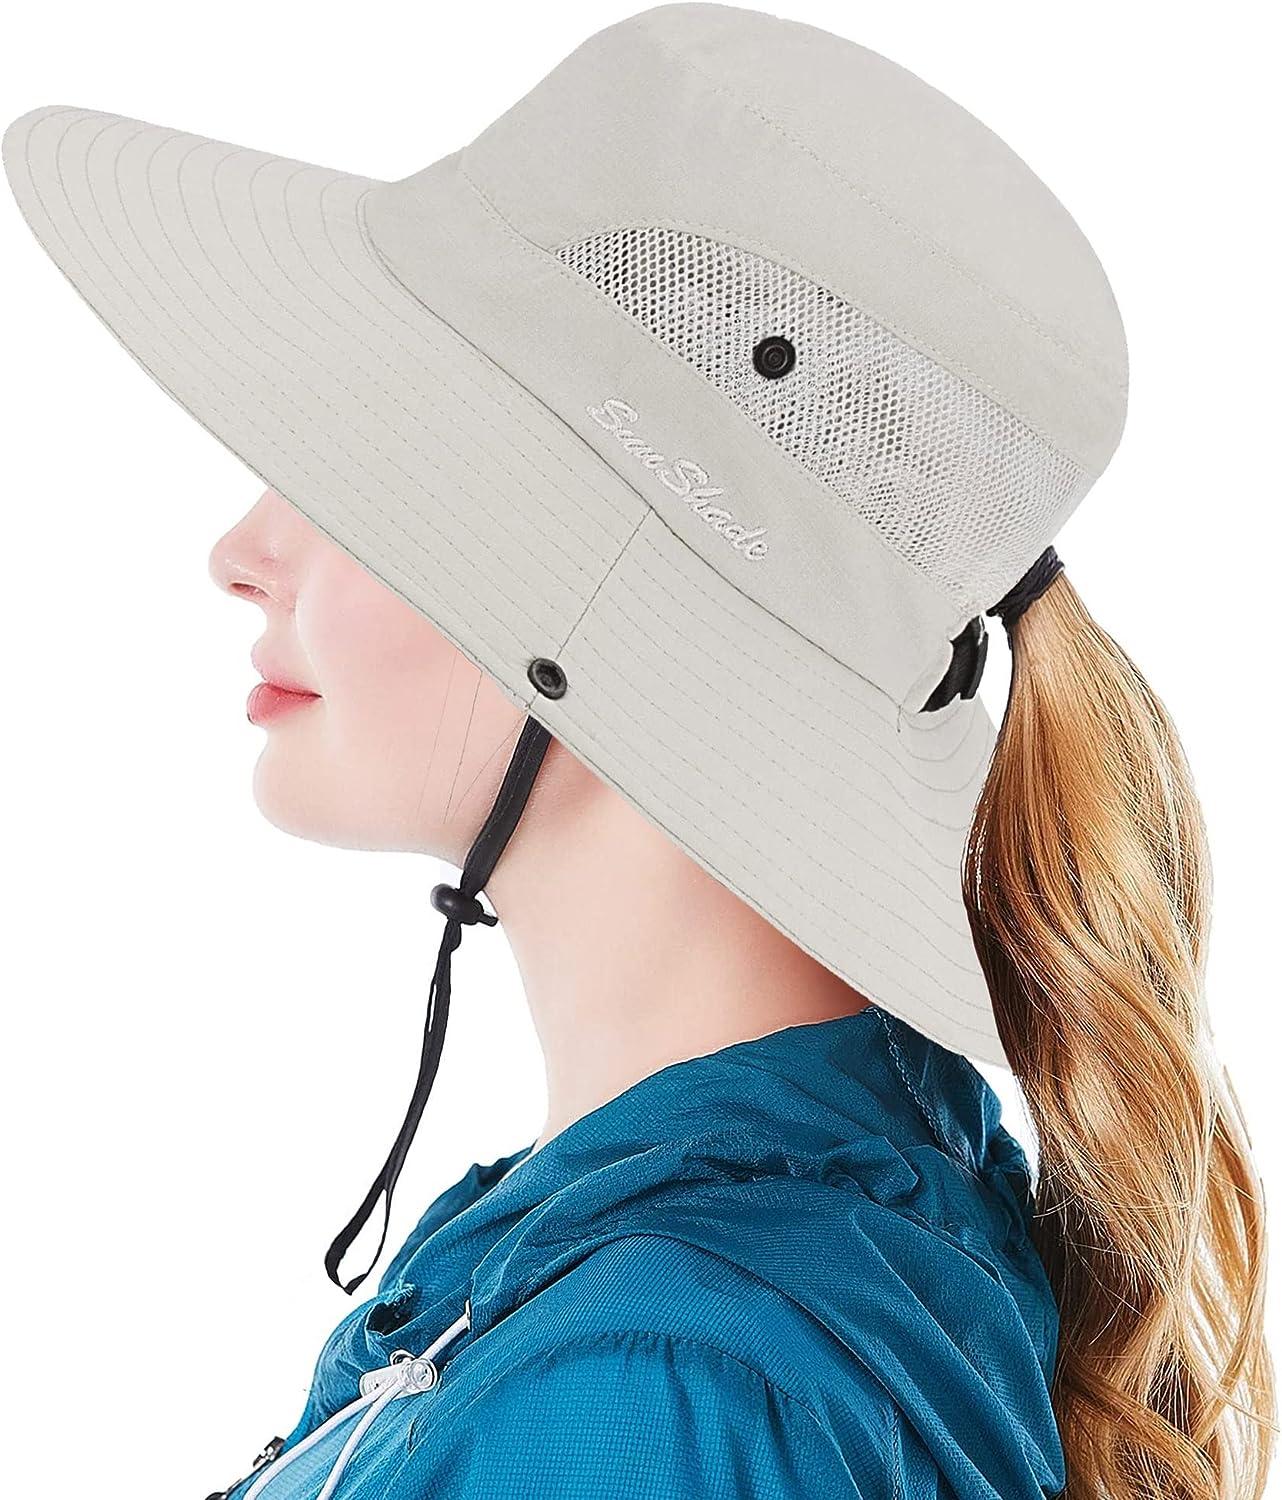 Womens Summer Sun-Hat Outdoor UV Protection Fishing Hat Wide Brim